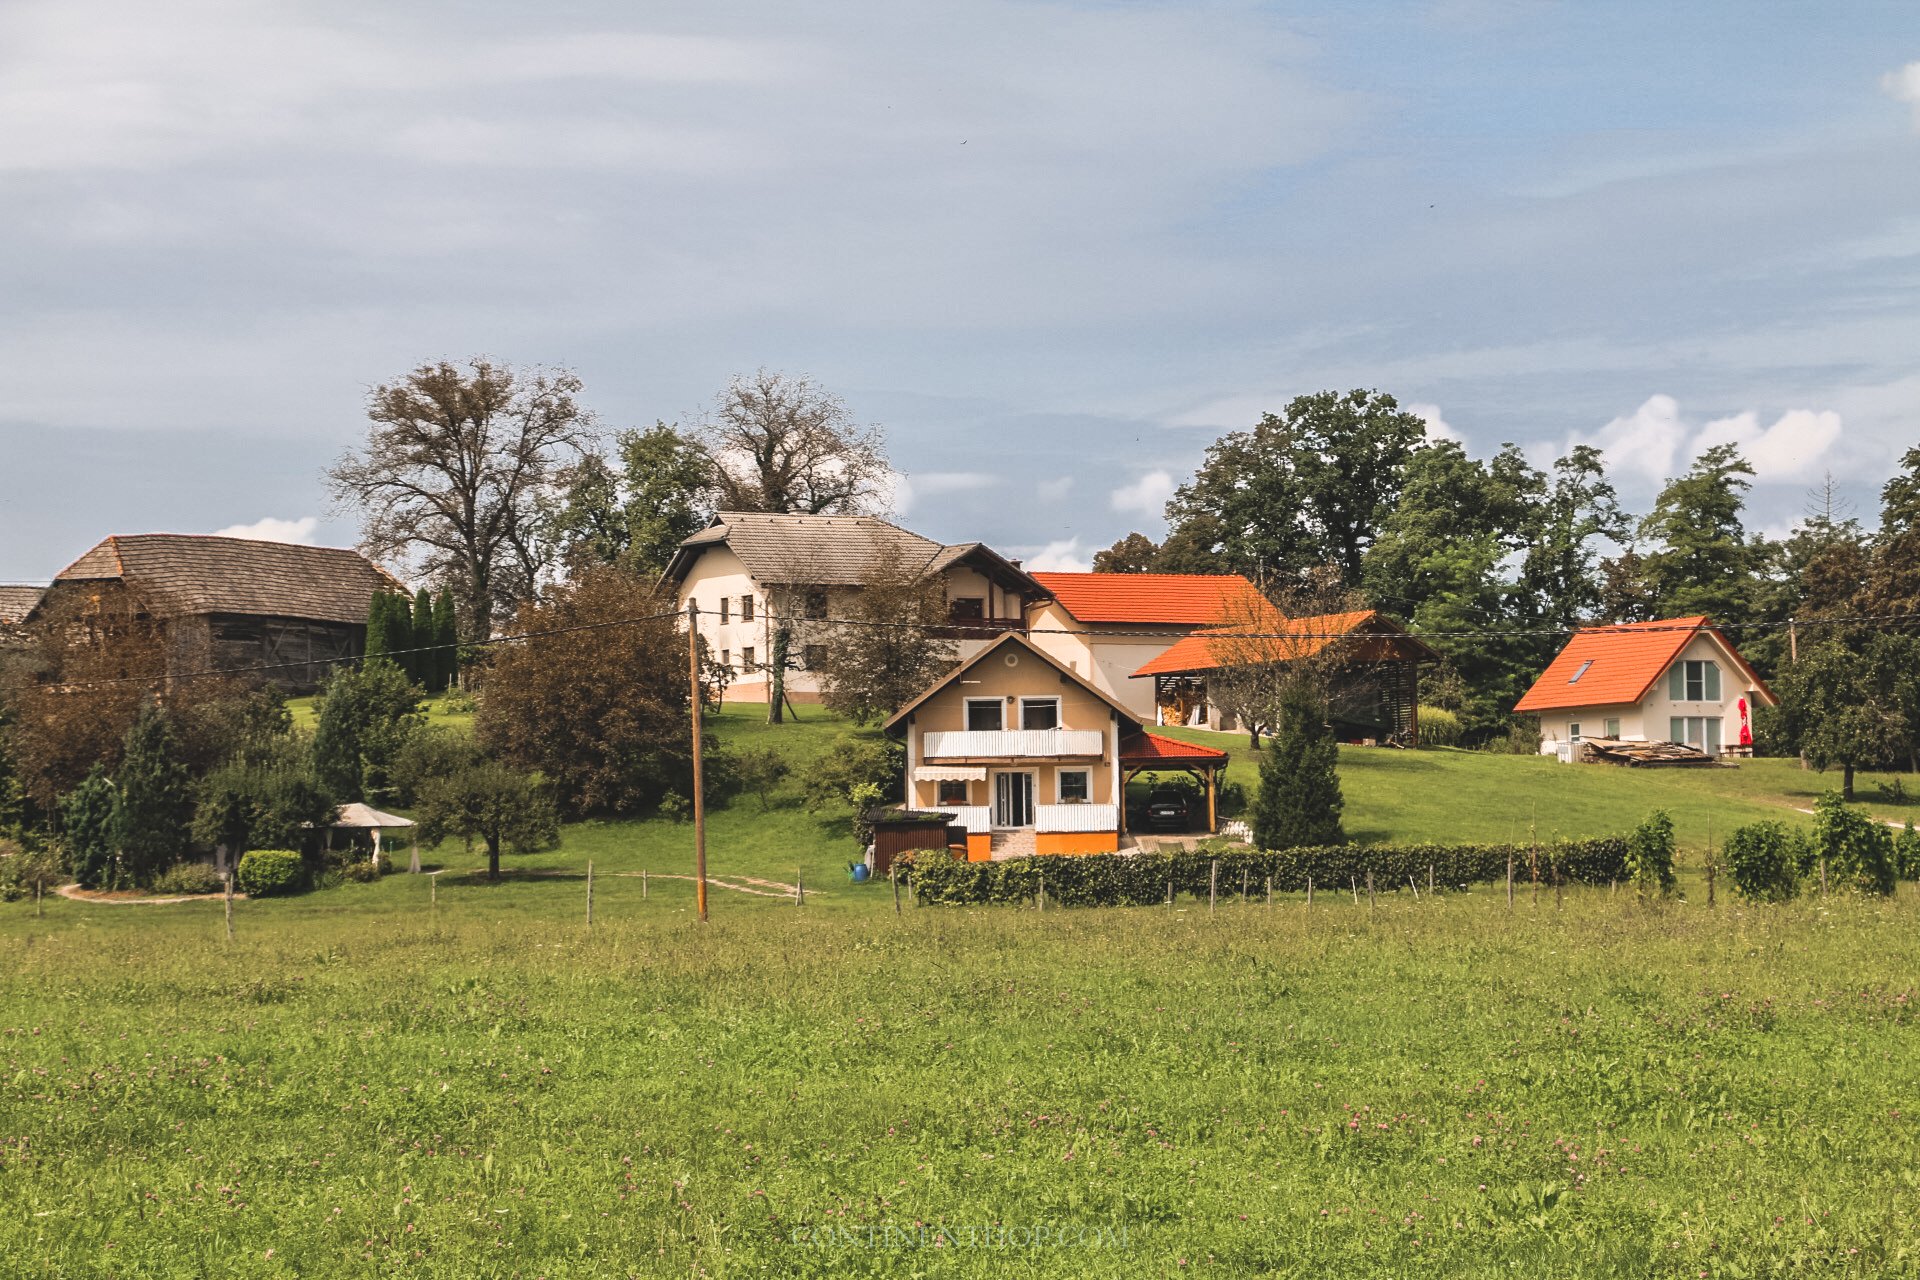 Cheapest EU countries to live in - houses in a village in Slovenia